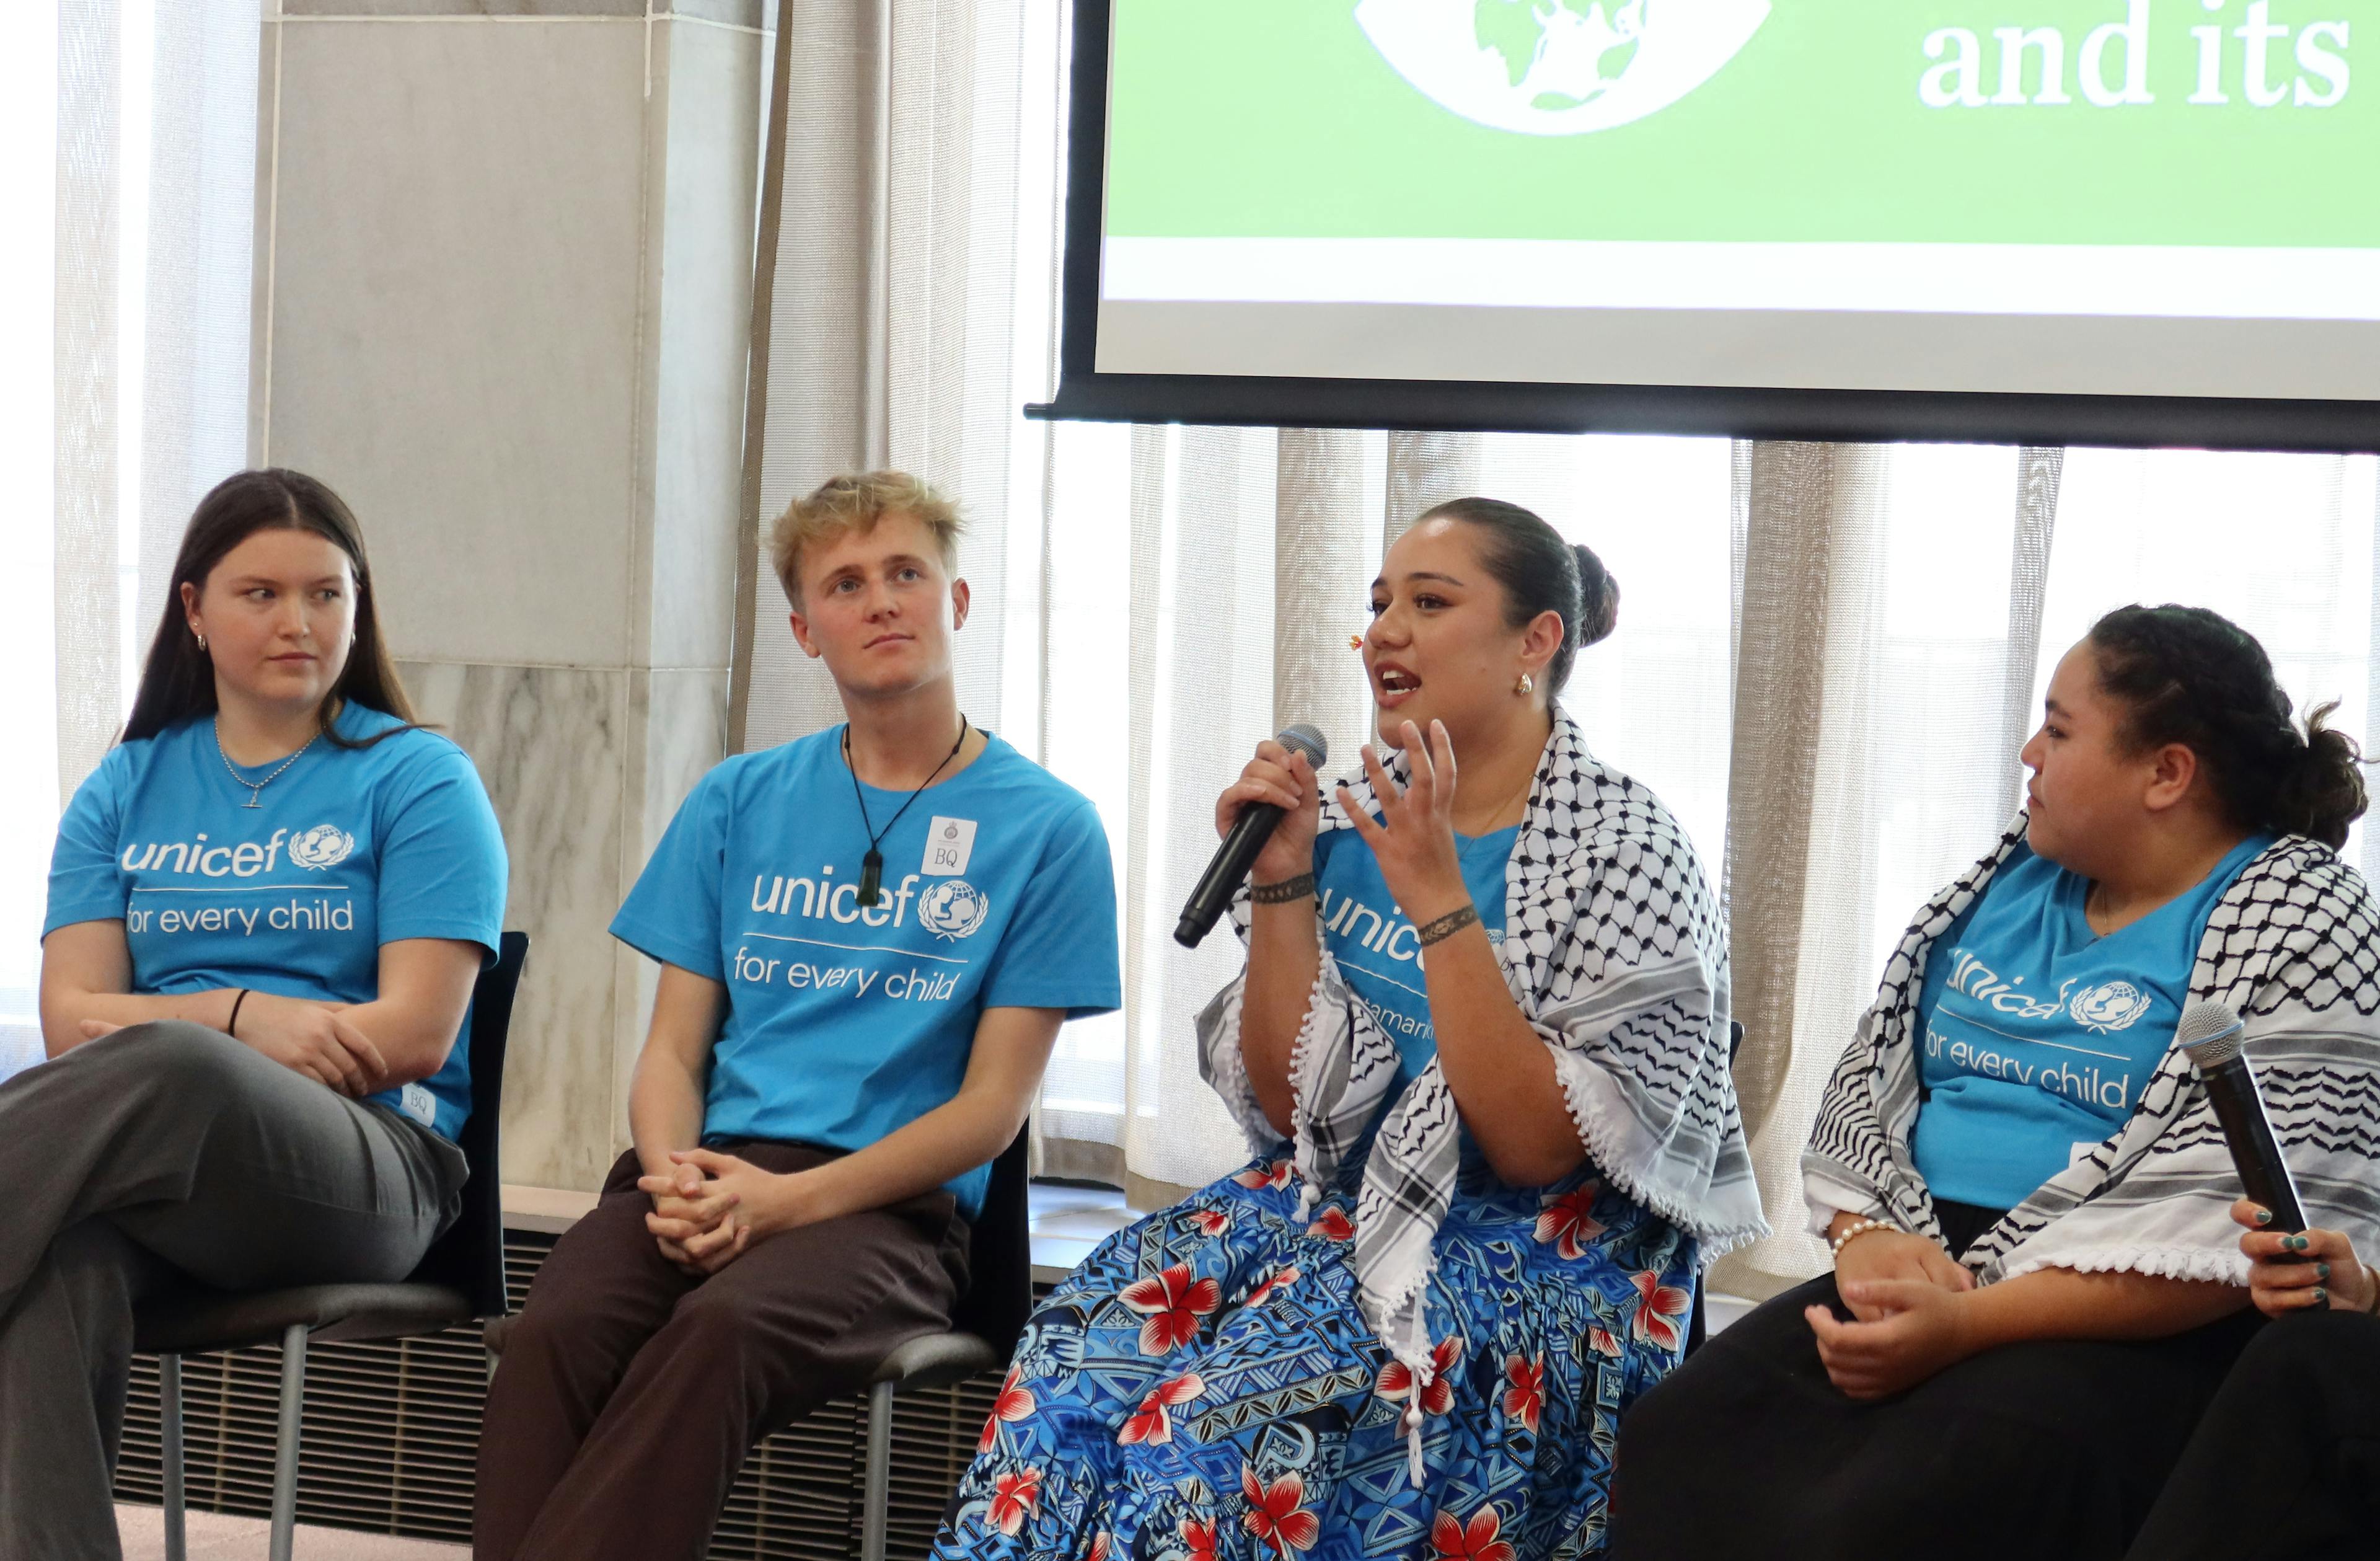 UNICEF Aotearoa's Young Ambassadors speaking at the first youth forum in Parliament.